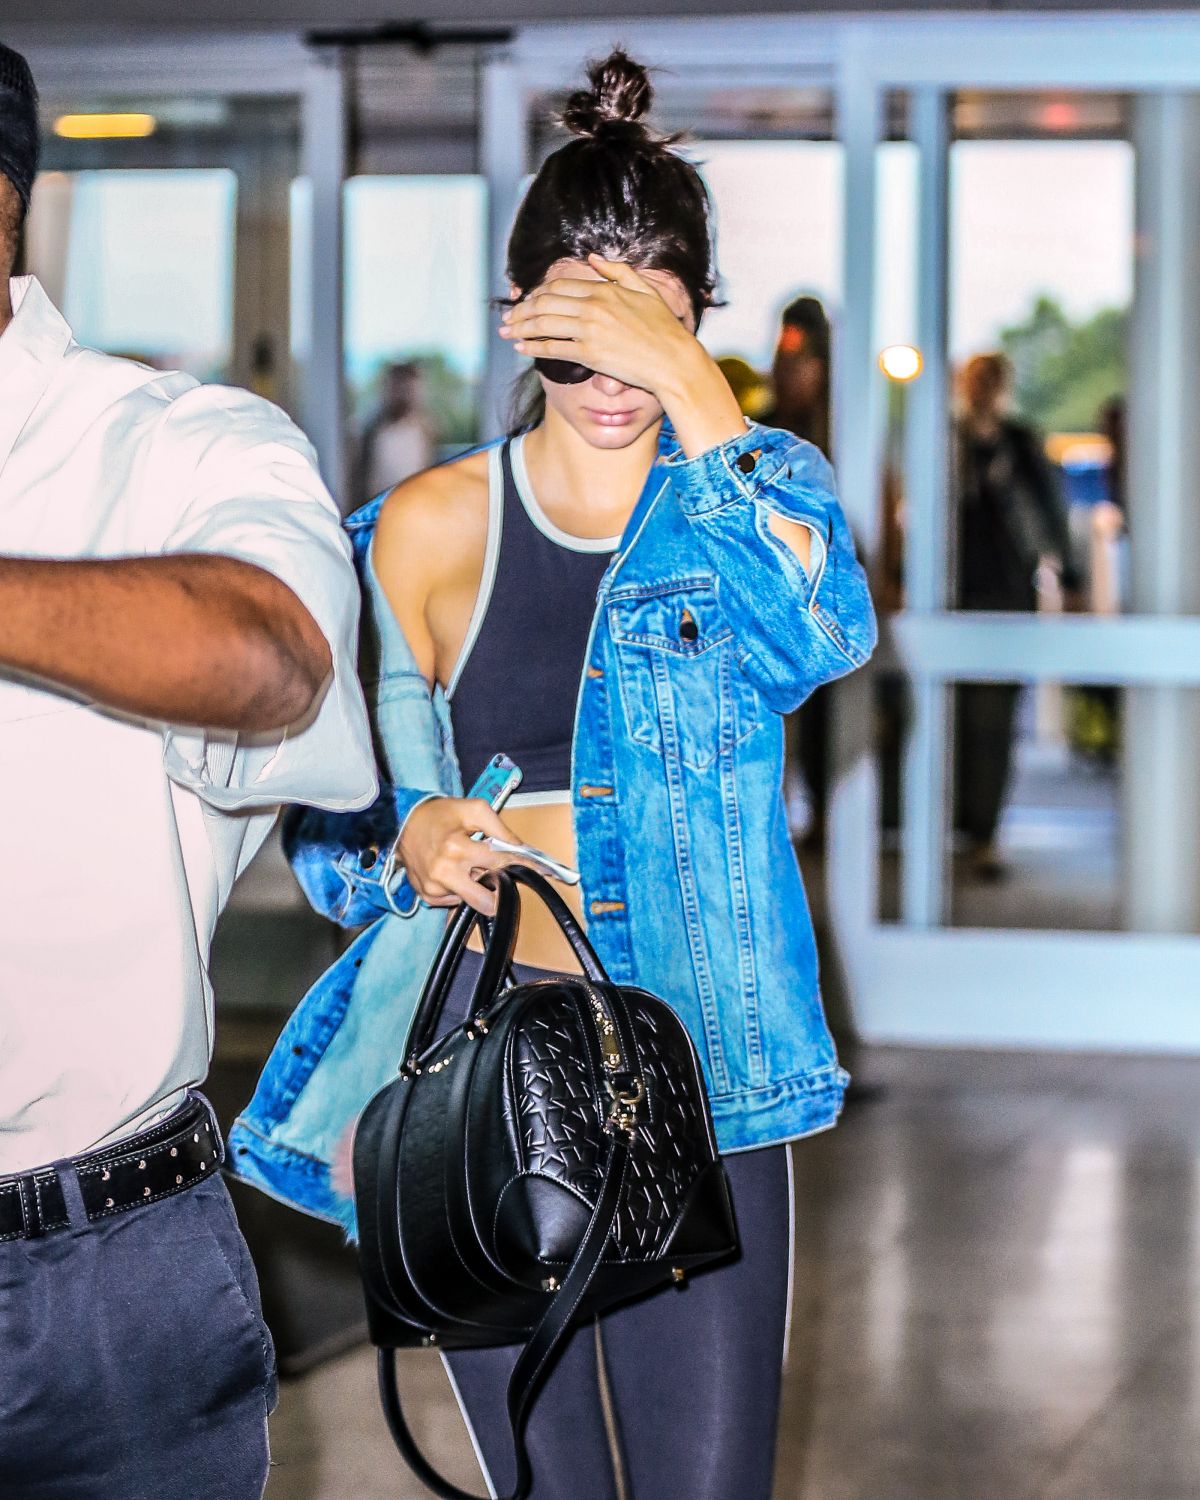 kendall-jenner-at-jfk-airport-in-new-york-07-01-2016_4